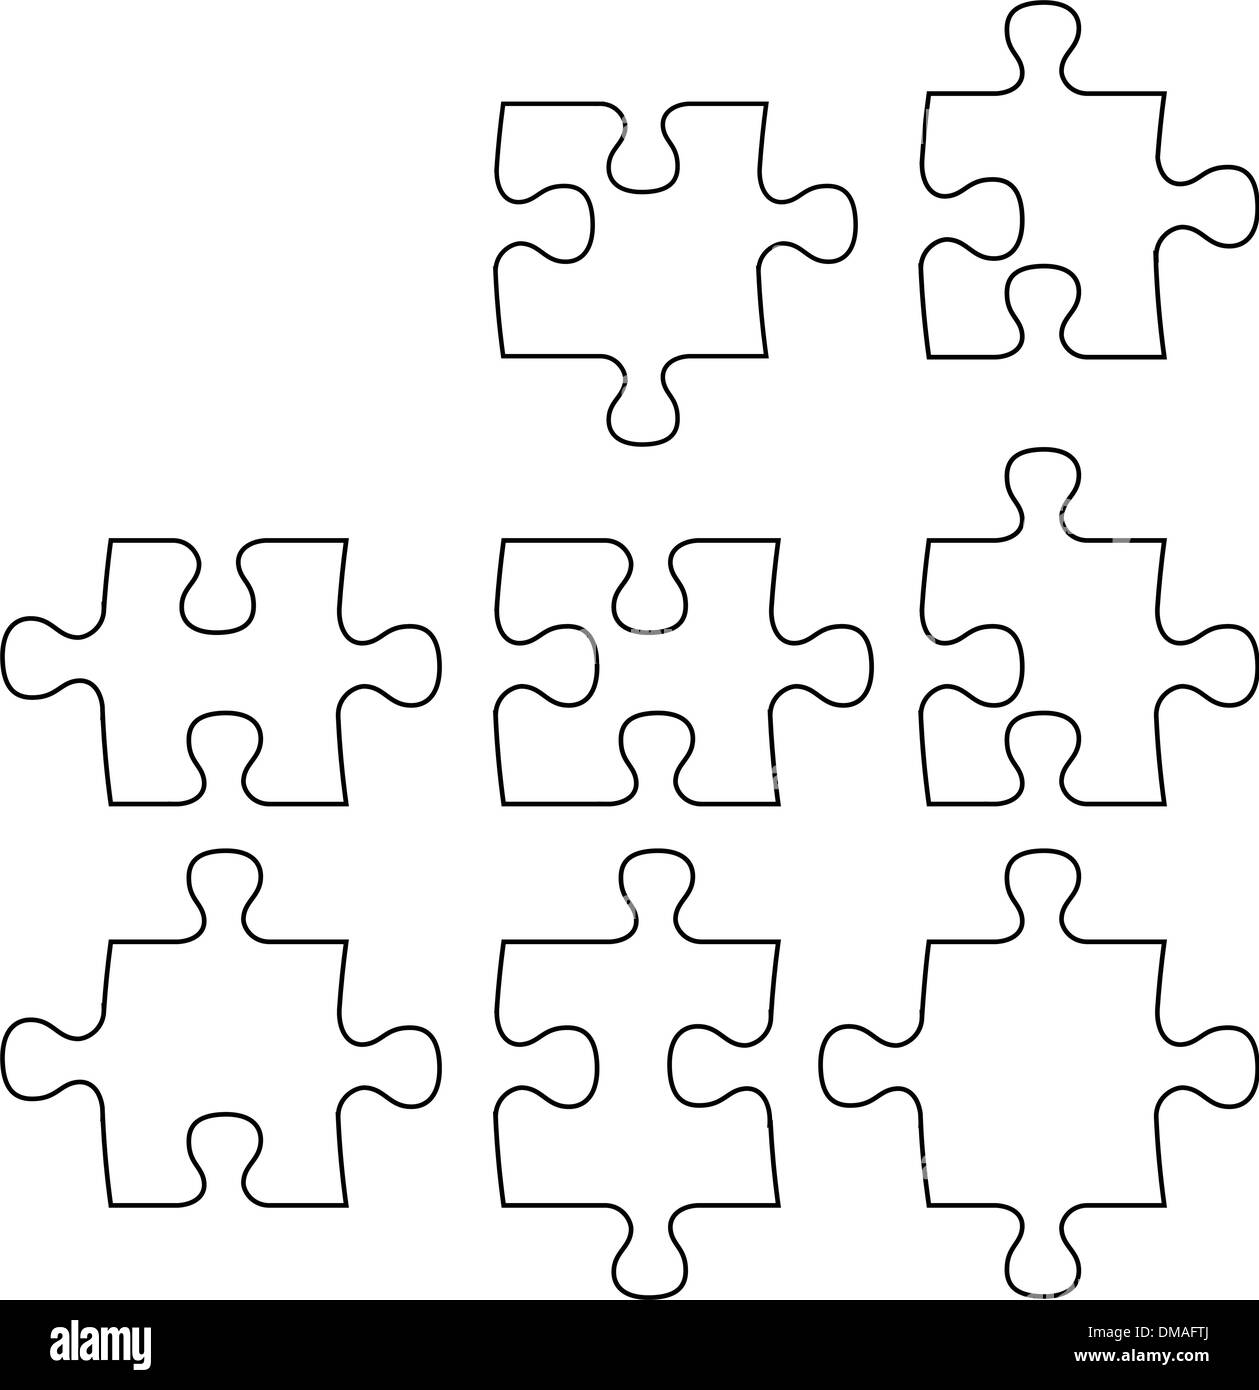 Blank puzzle pieces Stock Vector Images - Alamy